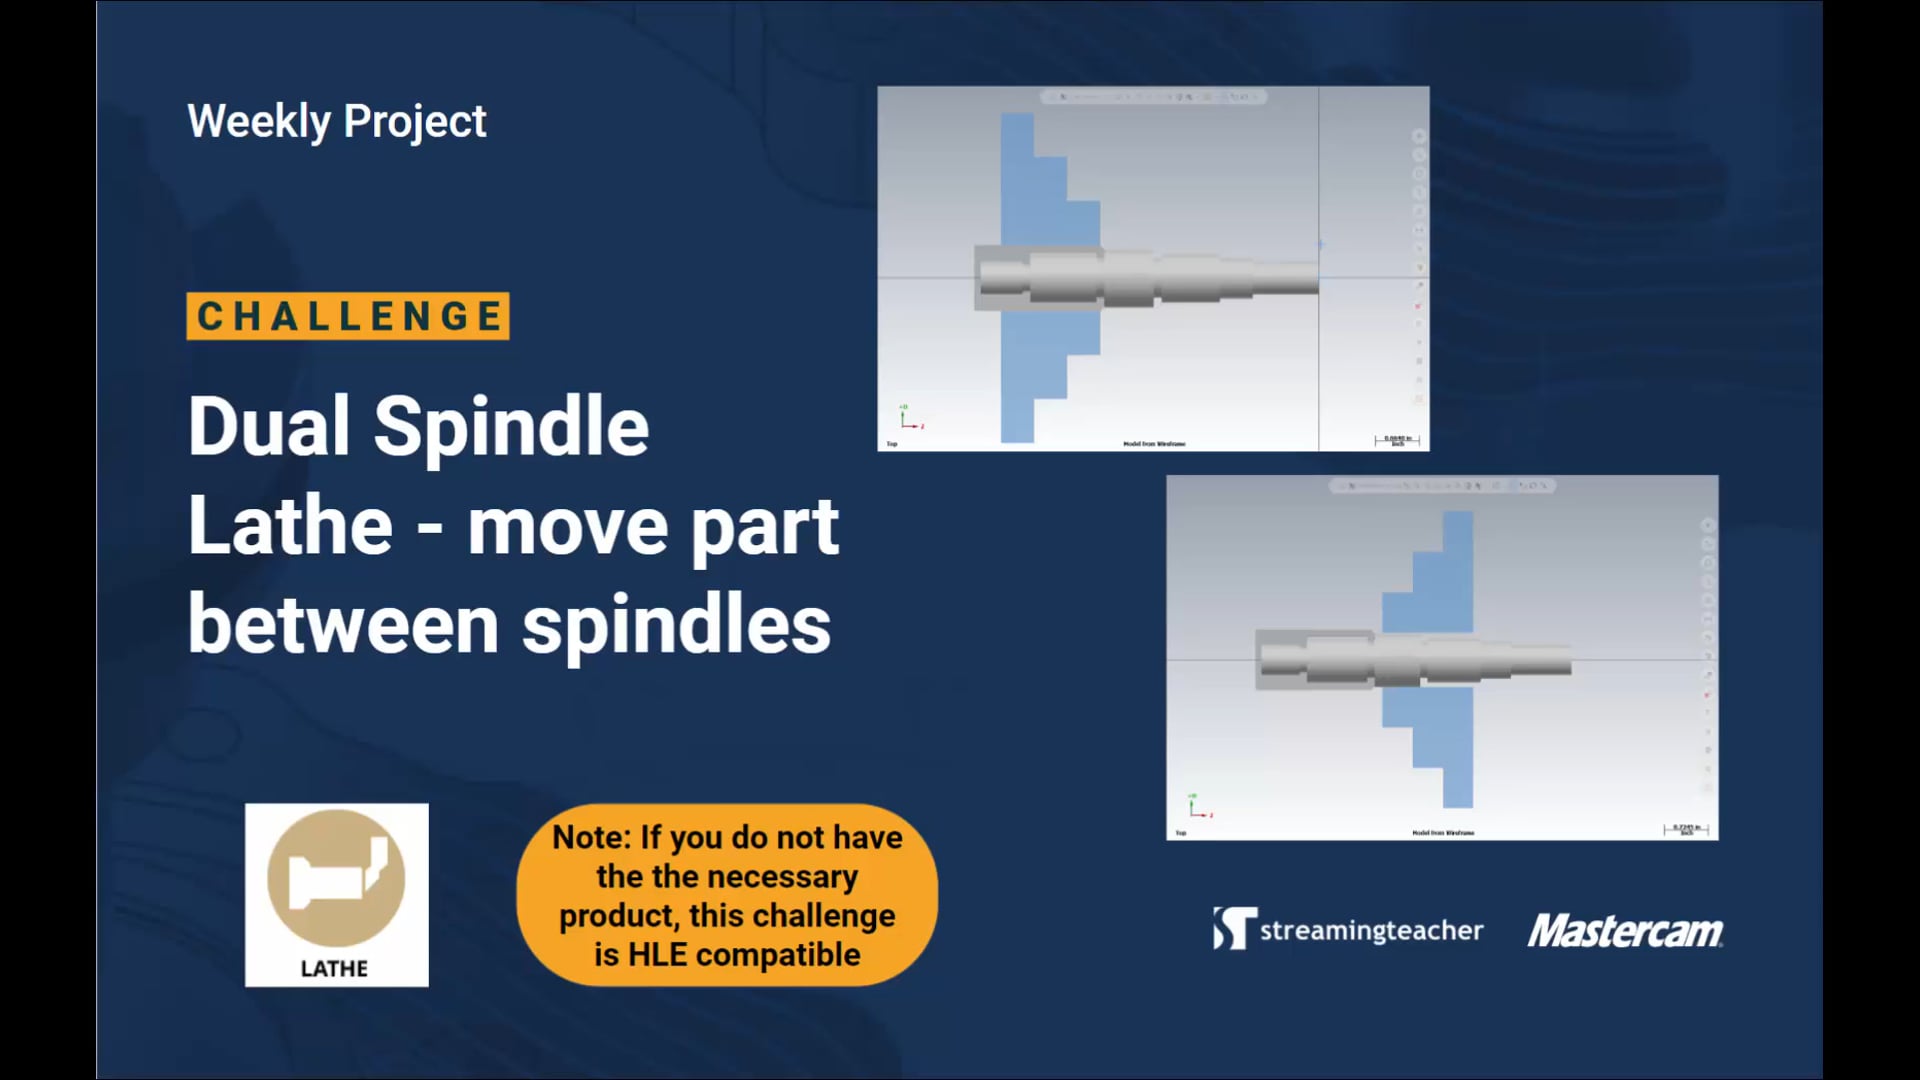 Dual spindle Lathe - move part between spindles